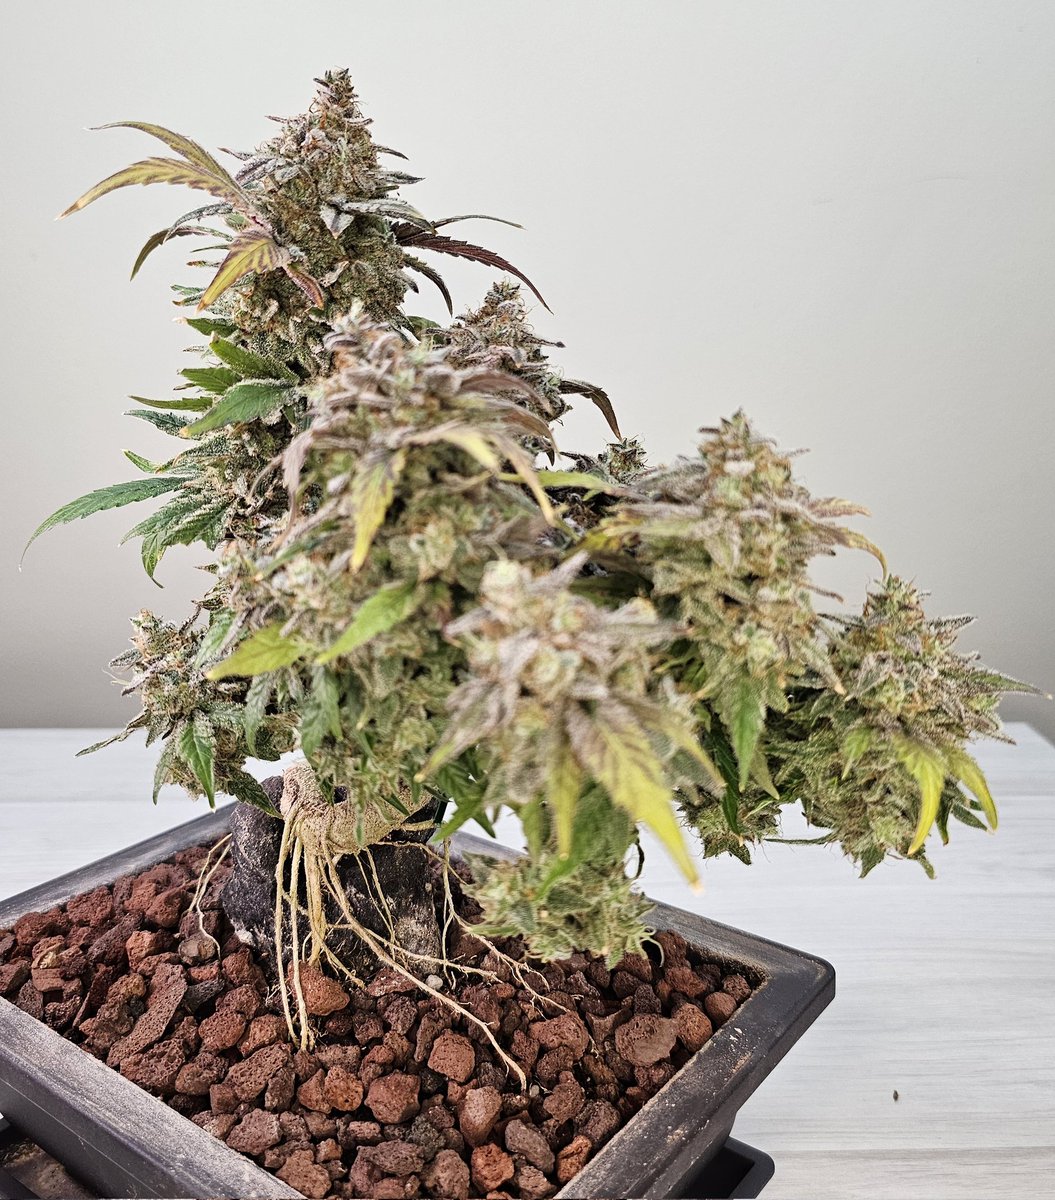 Transform your space into a cannabonsai oasis with a little help from our friends @MarsHydroLight and @MephistoGenetic 🌱✨. Elevate your grow game and save with code 'cannabonsai' - 10% off Mephisto and 4% off Mars Hydro. Cultivate, elevate, appreciate. #CannabonsaiCommunity